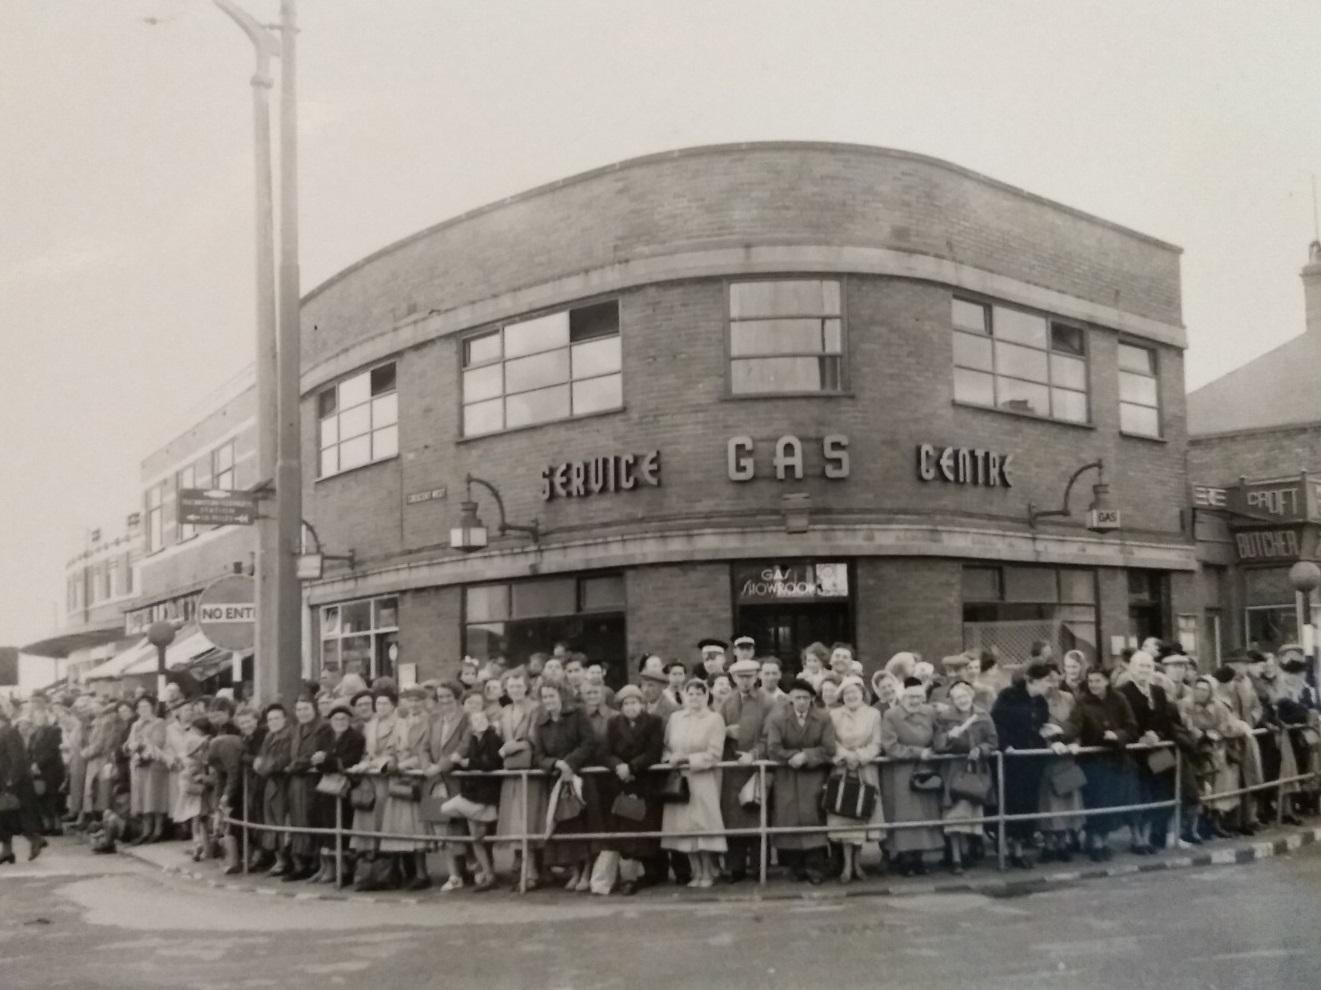 Crowds wait for Princess Margaret in Cleveleys on the corner of The Crescent and Victoria Road